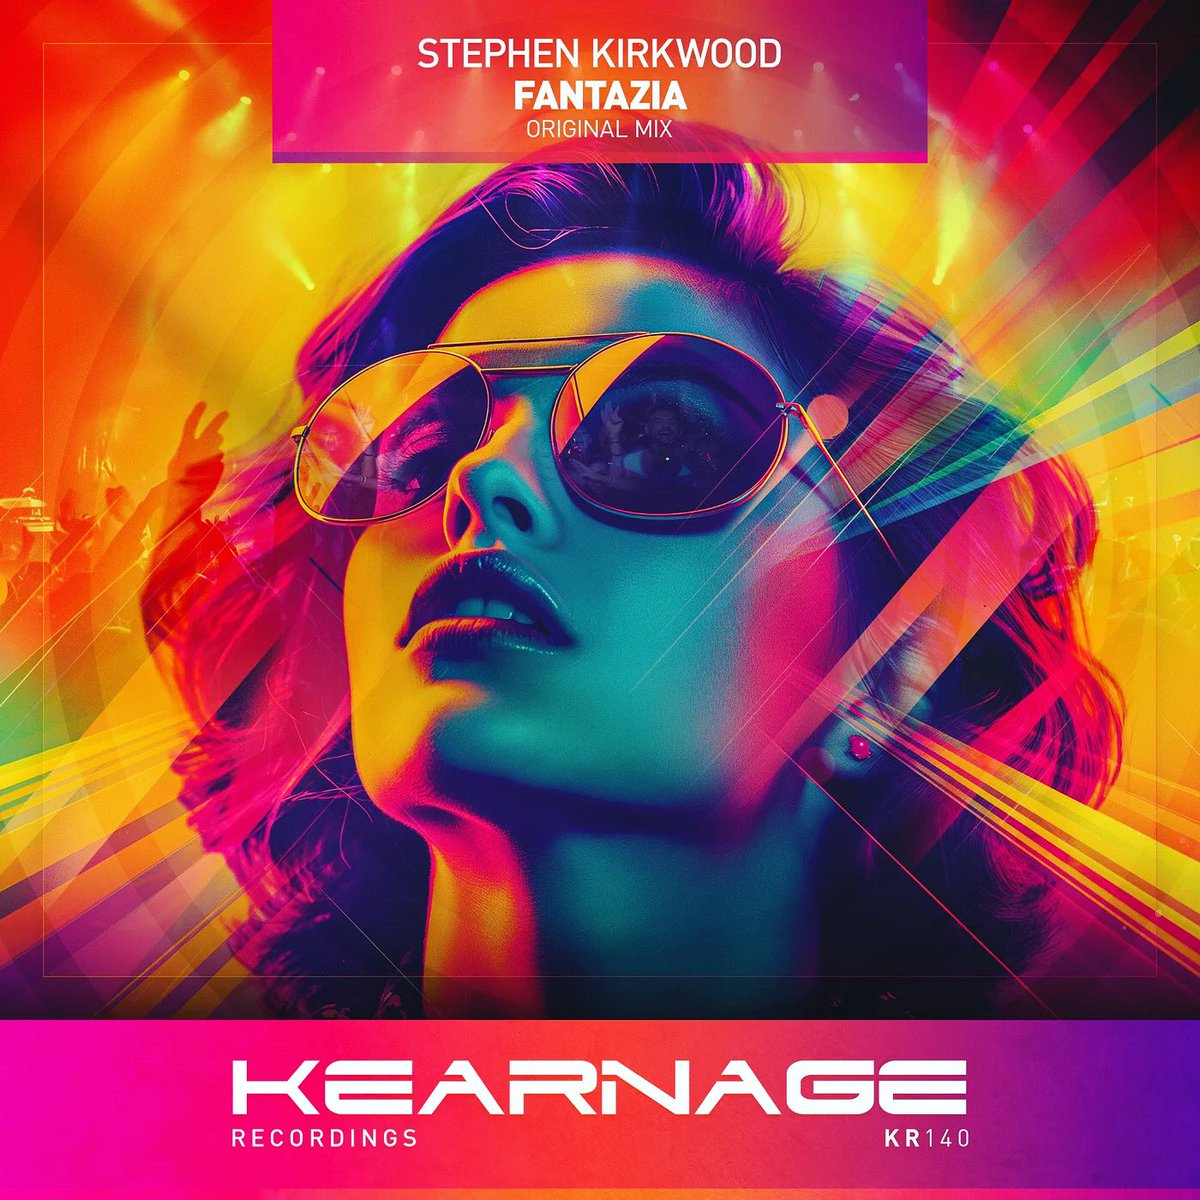 Fantazia by @StephenKirkwood is my ‘Record of the Week’ on Ready for the Weekend show number 431. Love the vibe on this track 😊 mixcloud.com/Jack_Phillips/… soundcloud.com/dj-jack-philli… #trance #trancemusic #stephenkirkwood #fantazia